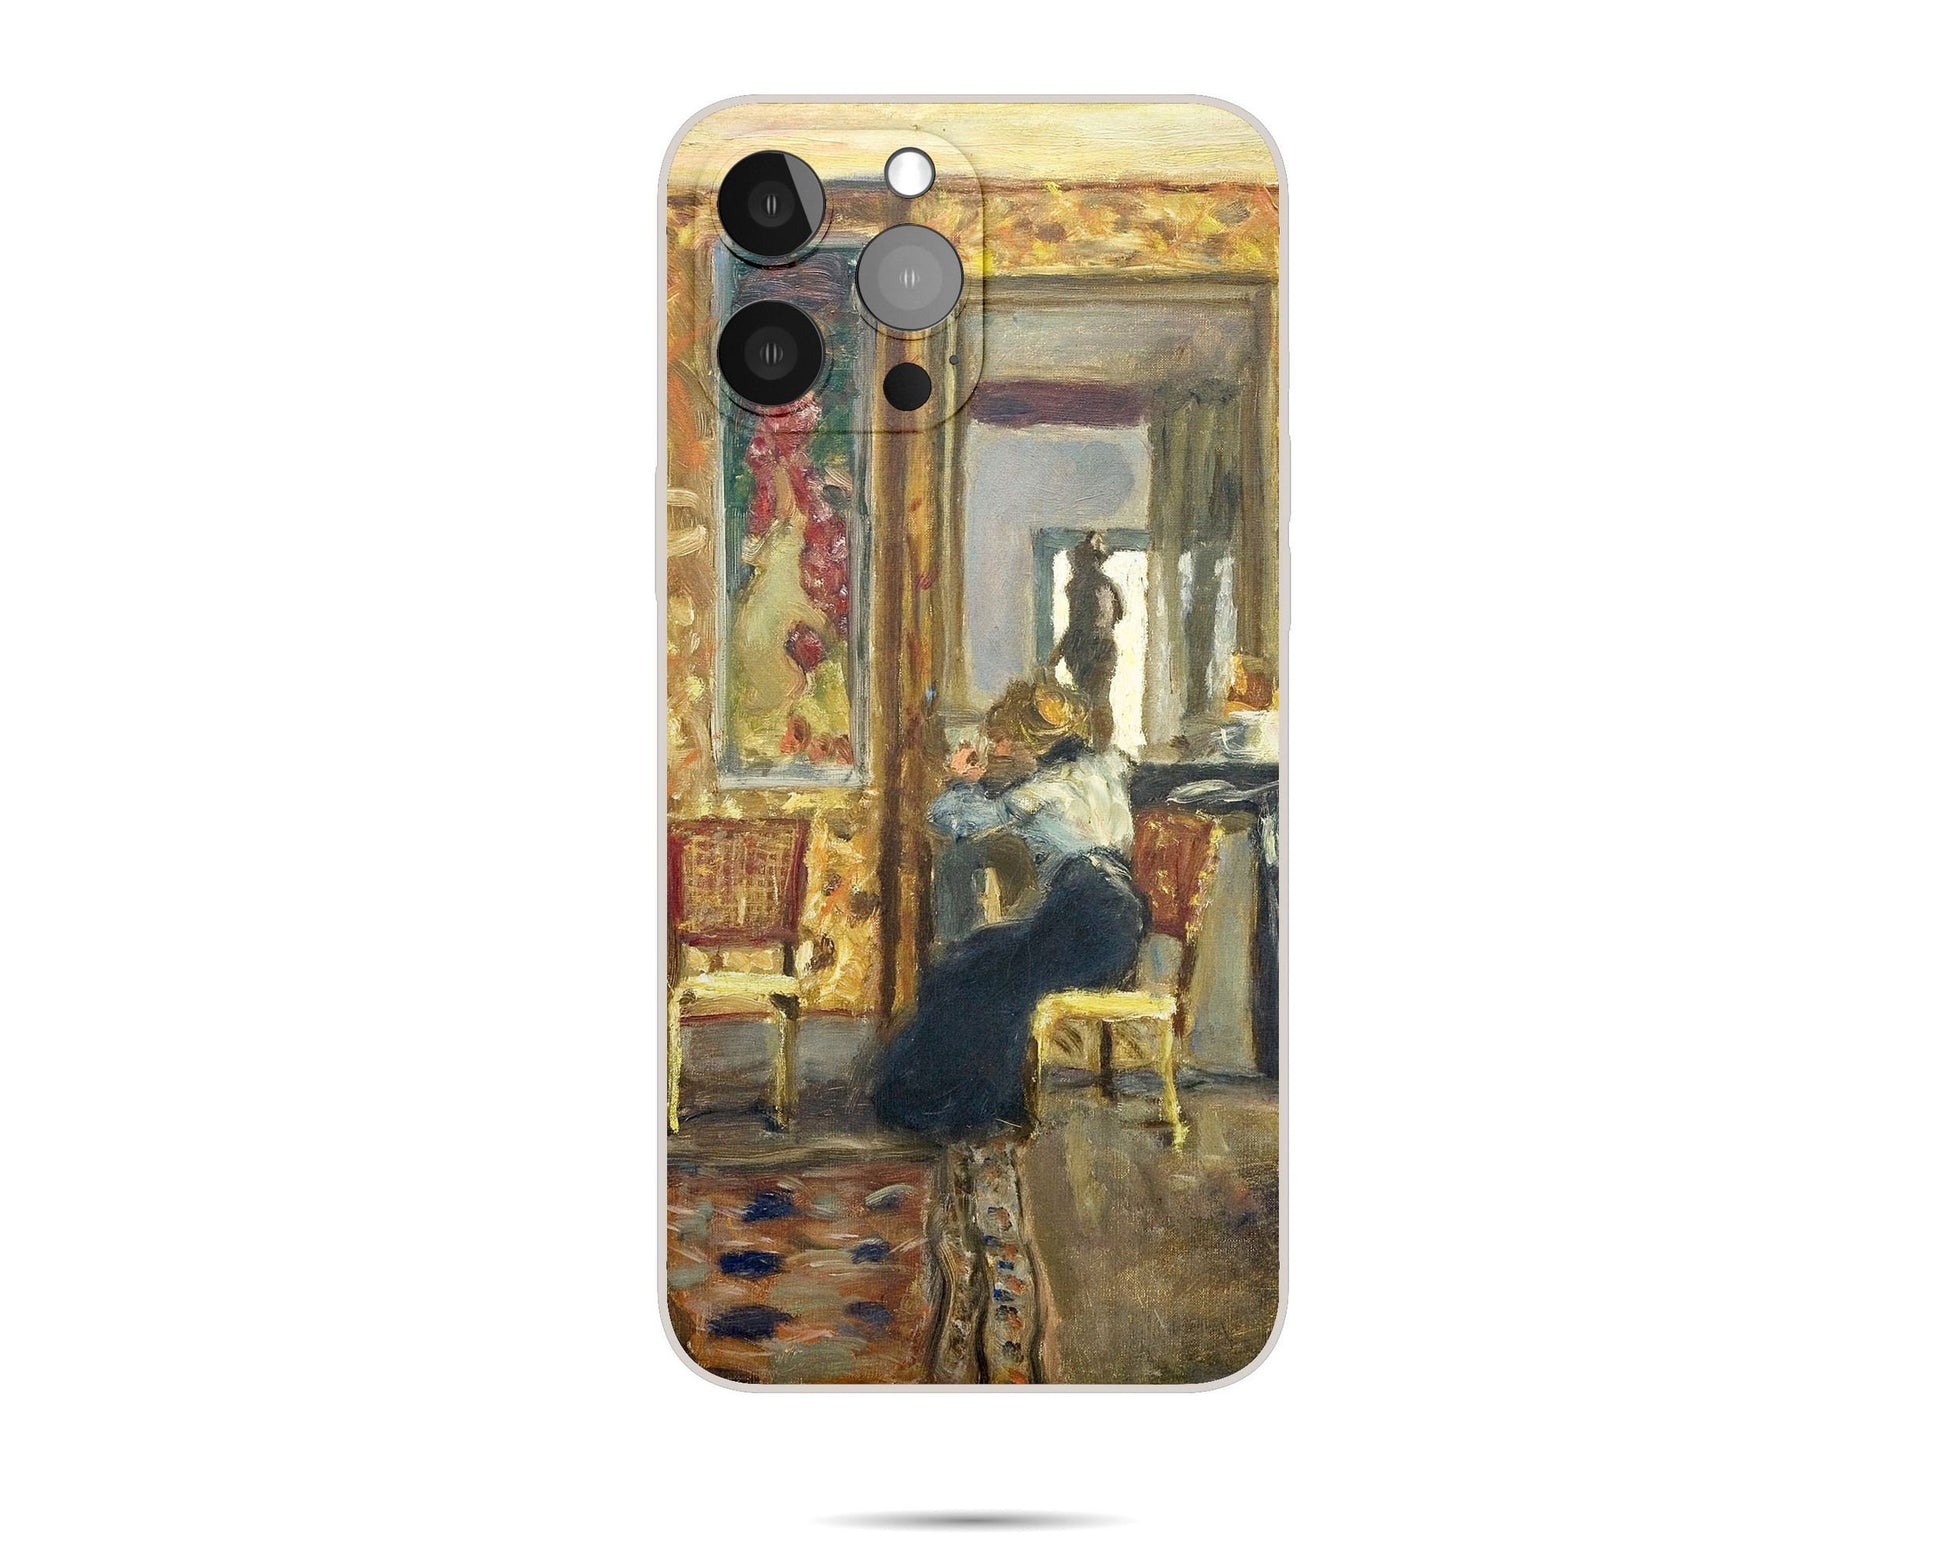 Iphone 14 Pro Case Of Pierre Bonnard Famous Painting, Iphone 12 Mini Case, Iphone Xs Max Case, Designer Iphone 8 Plus Case, Gift For Her